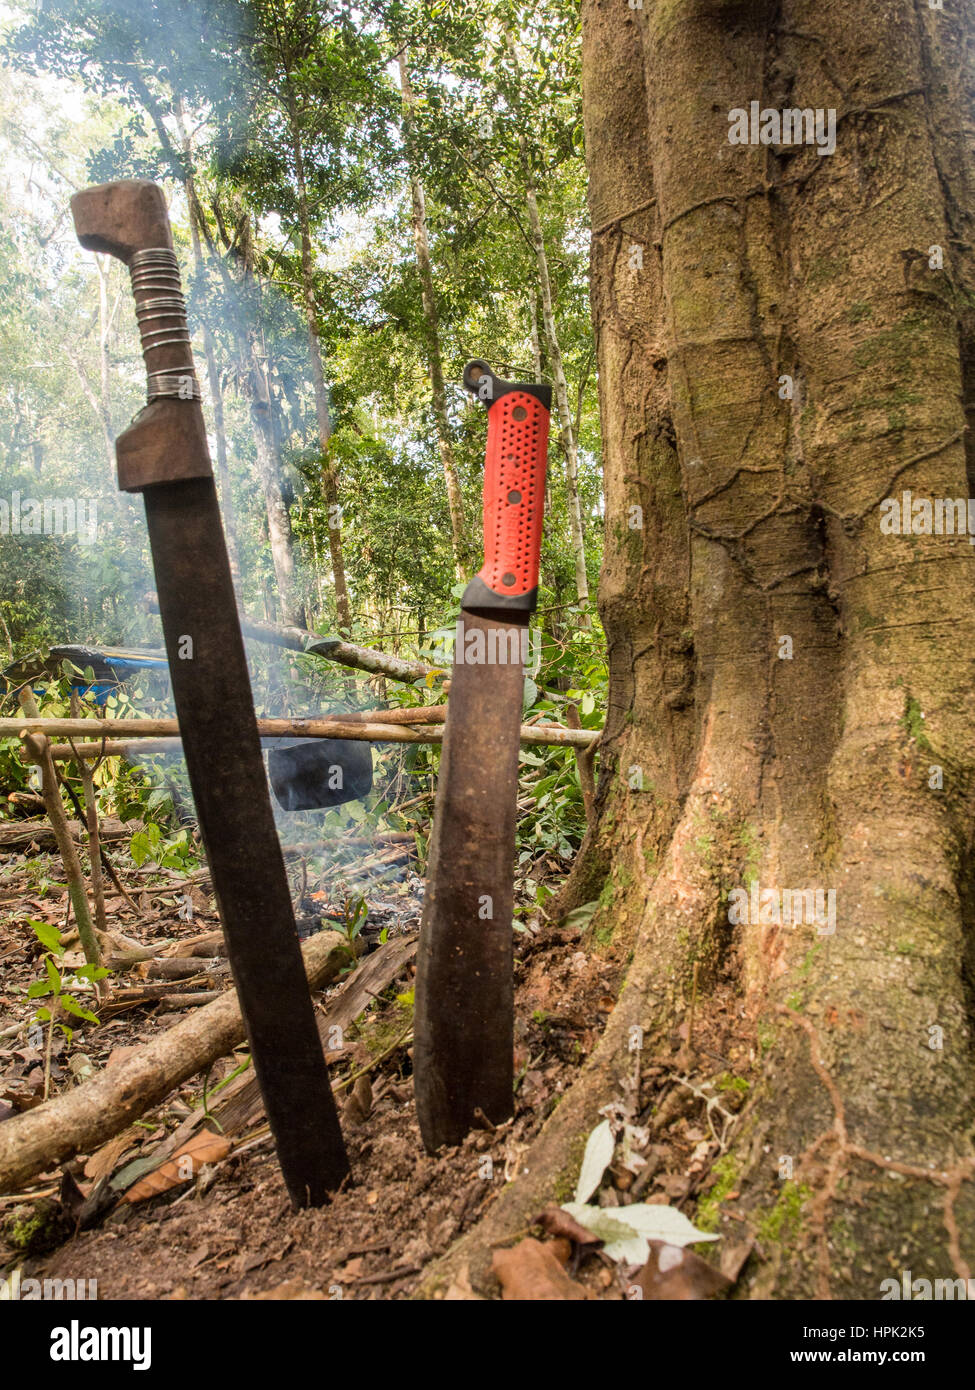 Machety. The main tool used by the Indians in the jungle. Stock Photo